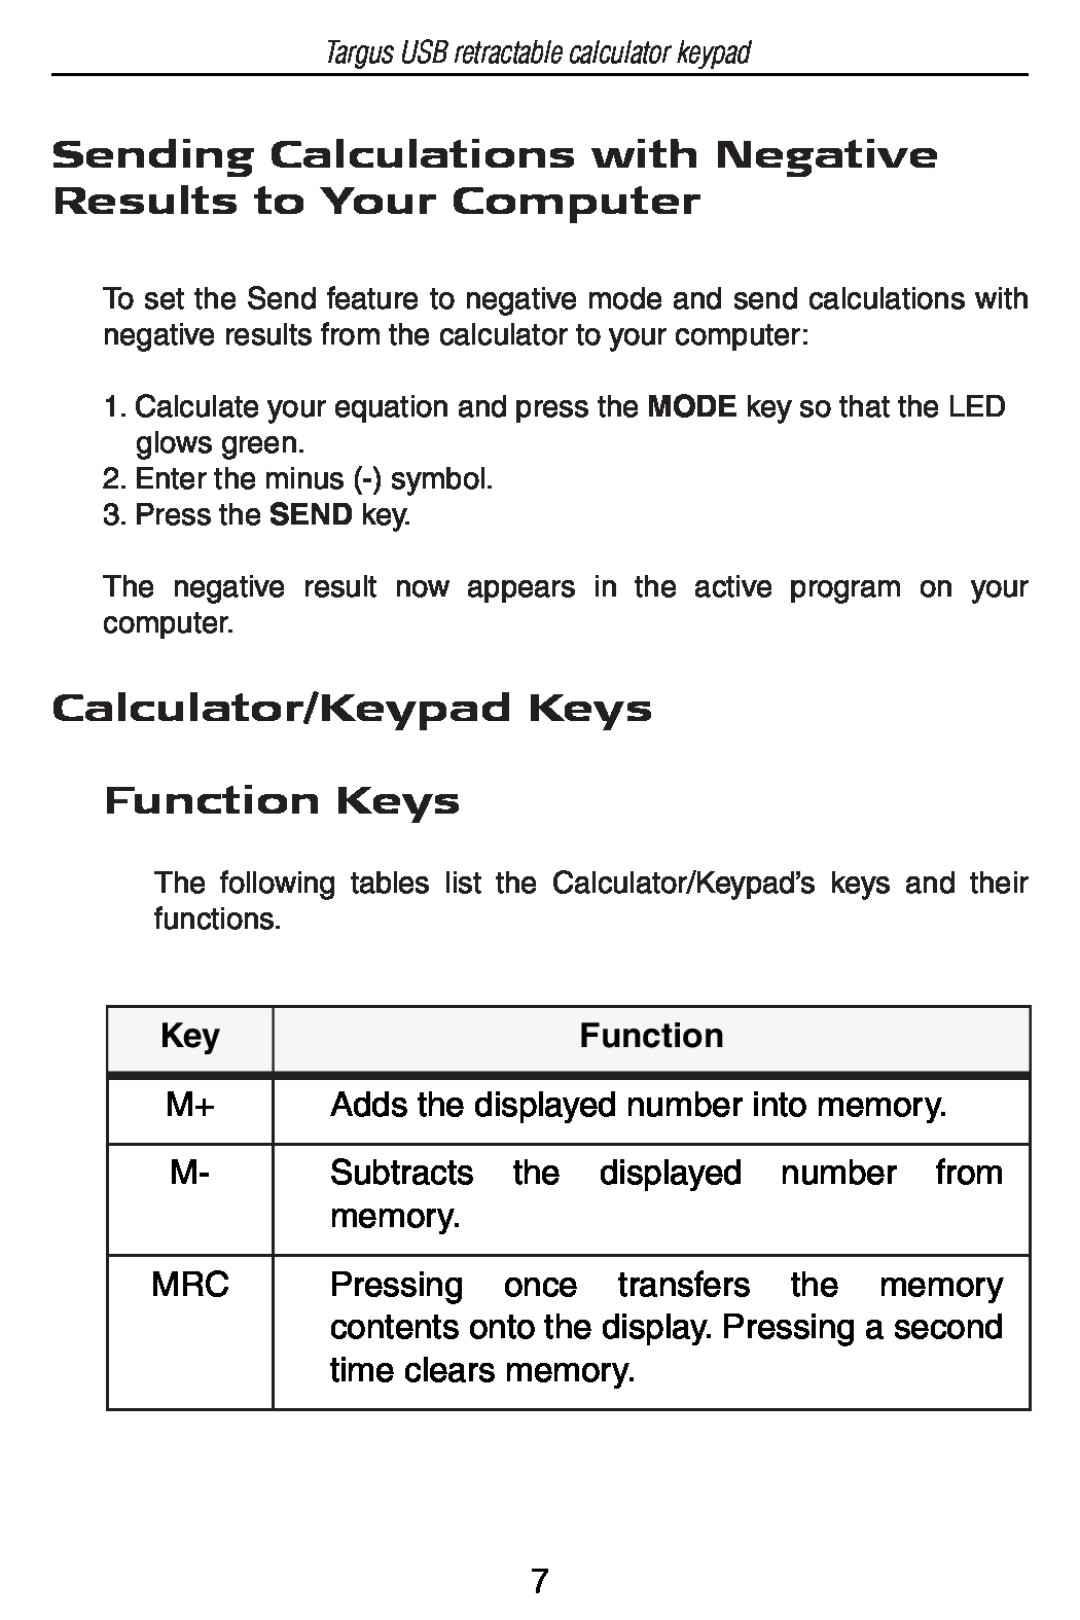 Targus USB Retractable Calculator Keypad Sending Calculations with Negative Results to Your Computer, Function 